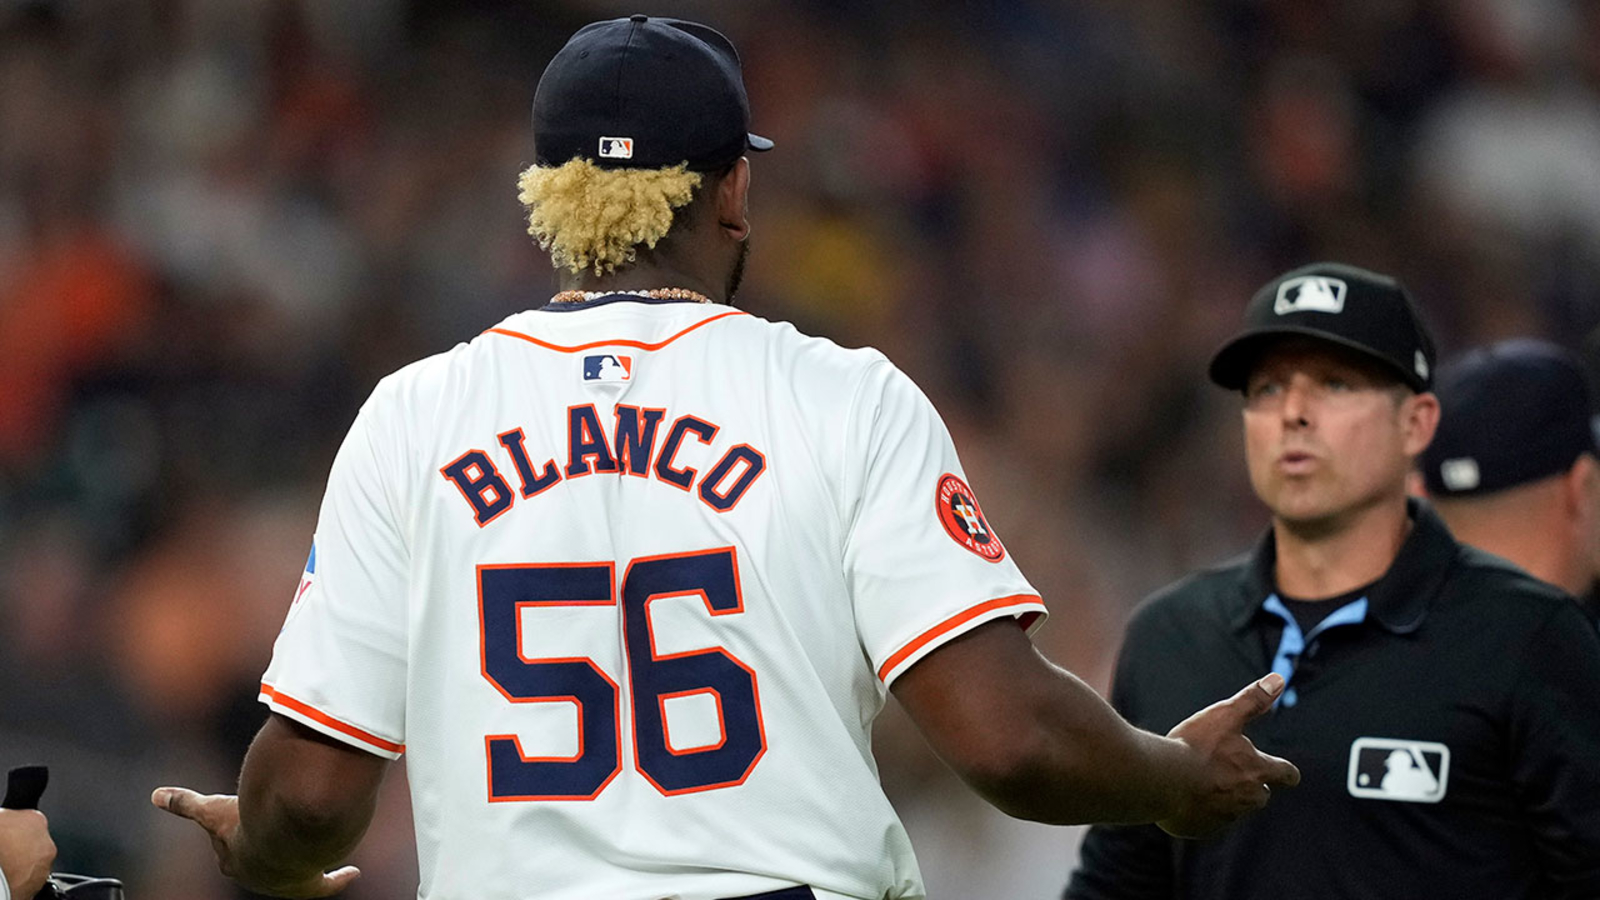 Ronel Blanco suspended: Houston Astros starting pitcher gets 10-game ban after ejection based on foreign substance check [Video]